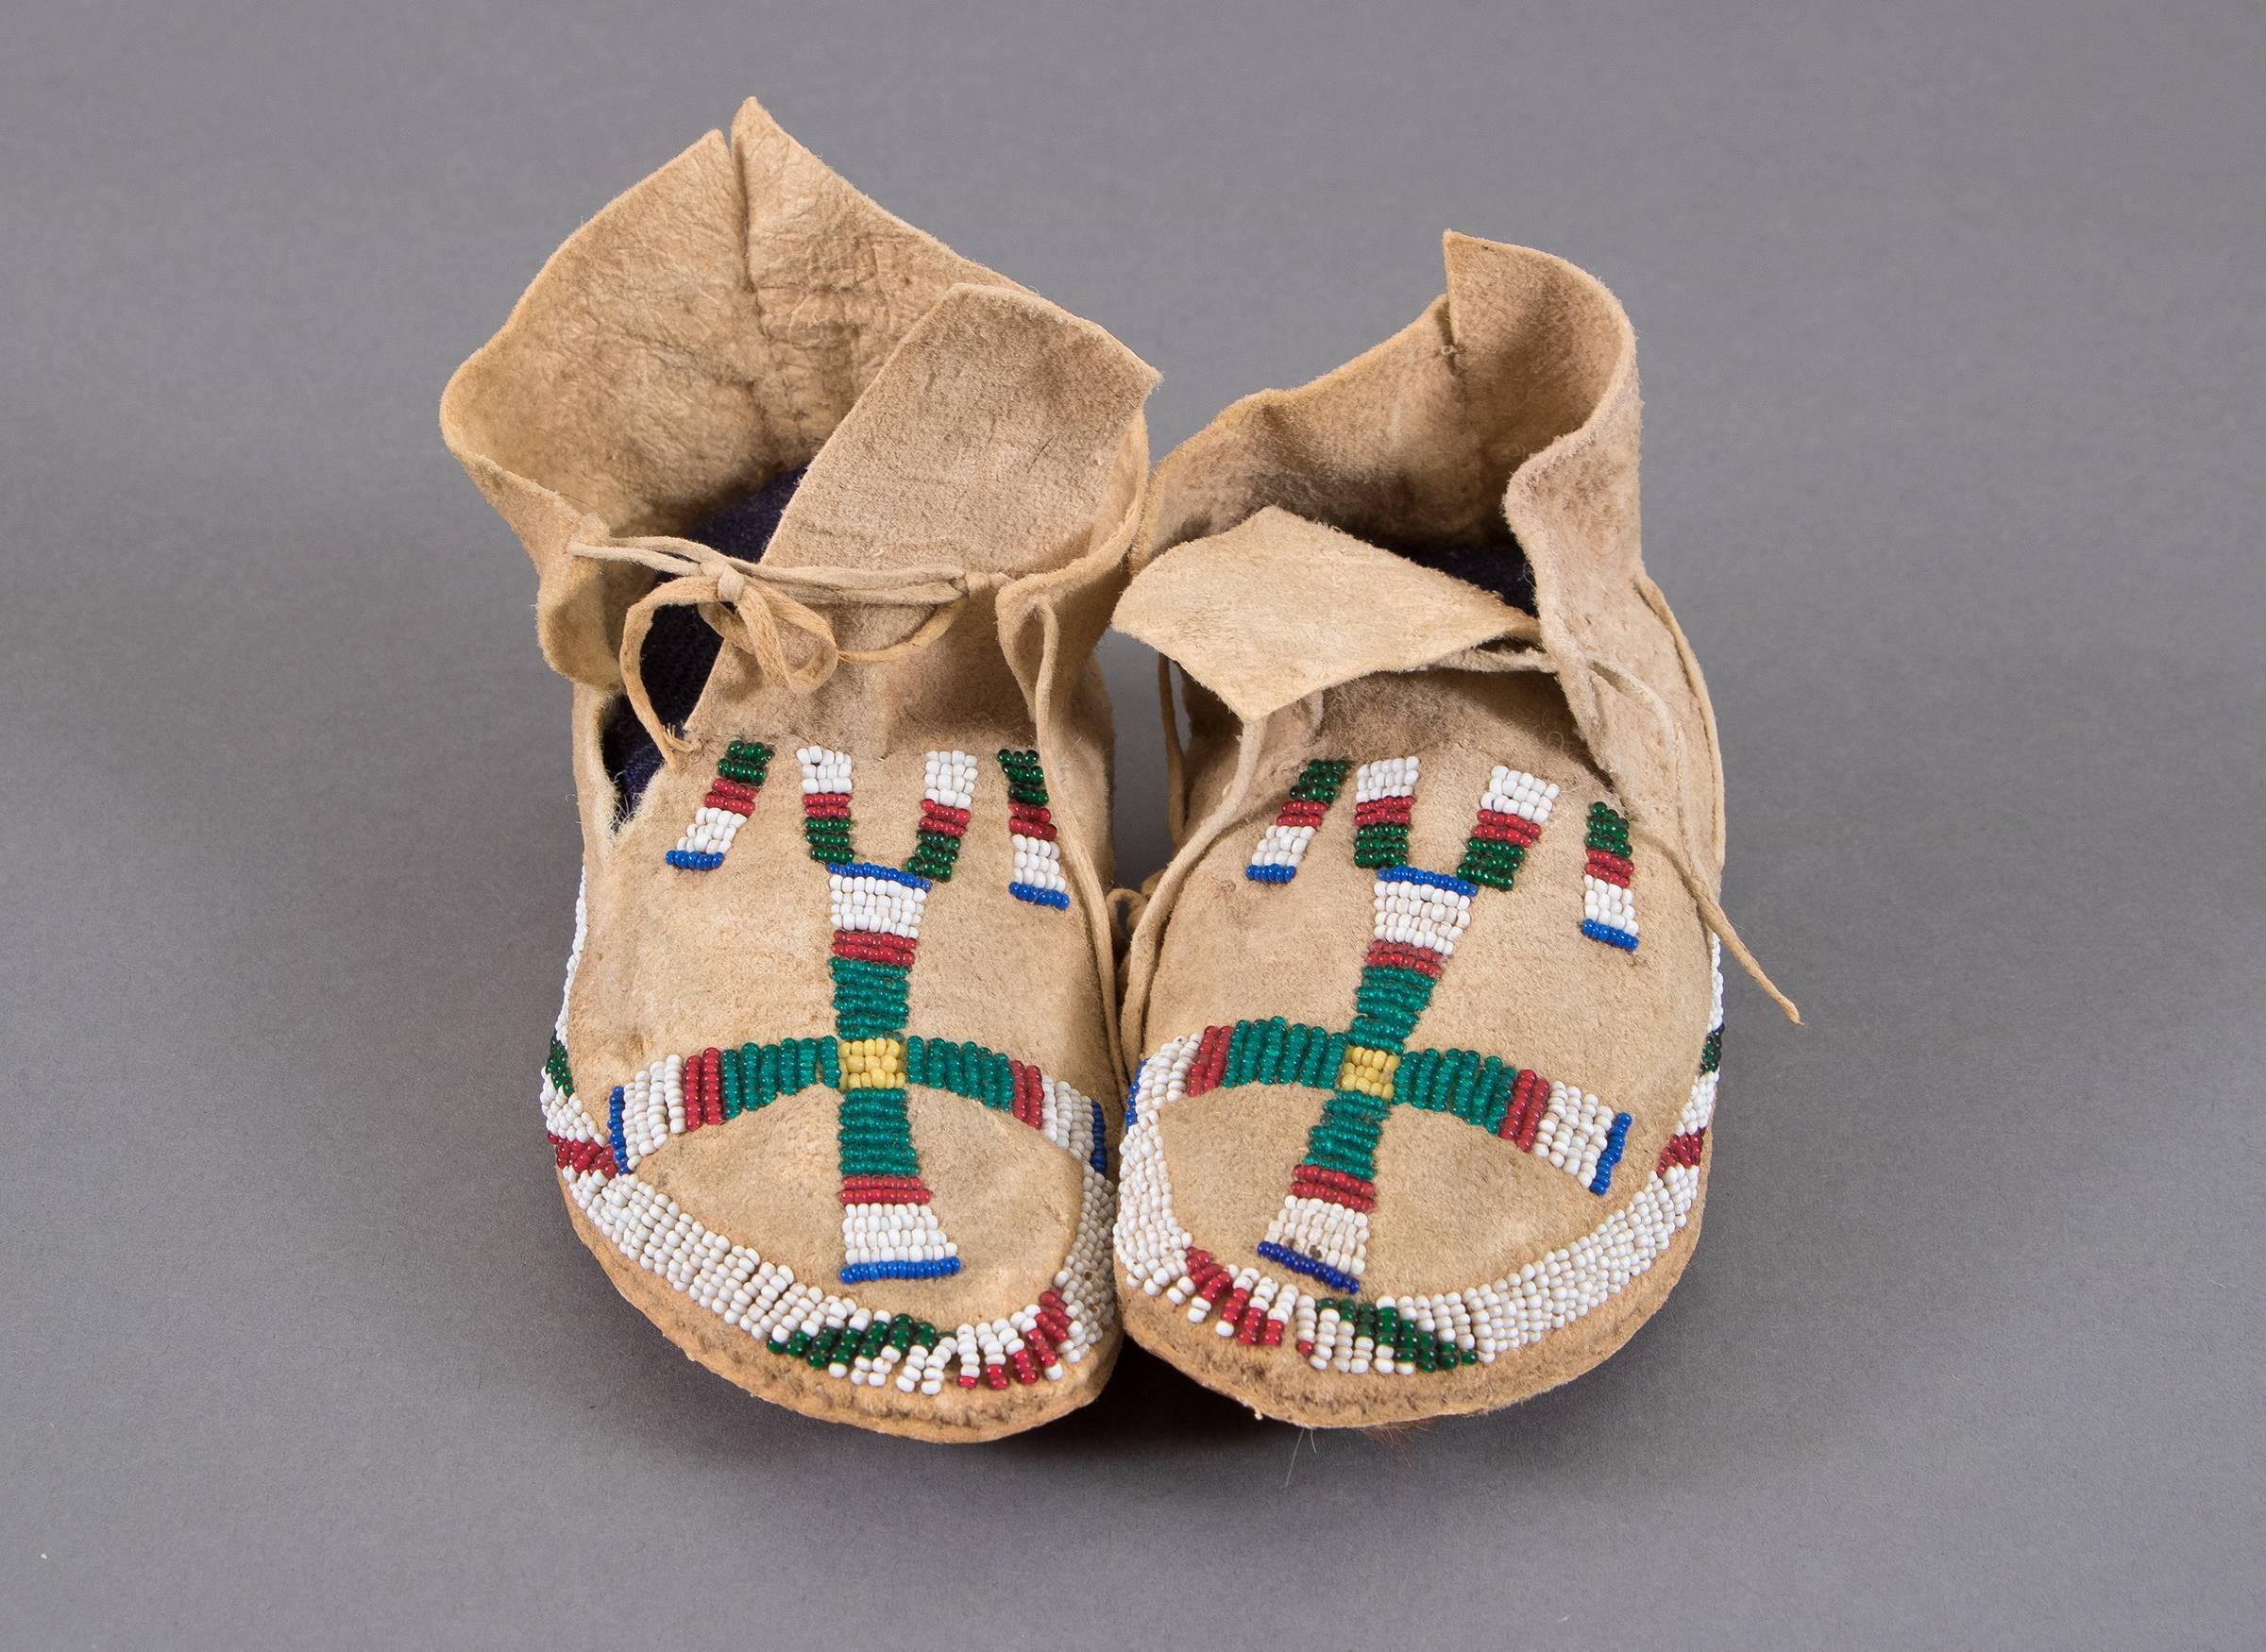 A remarkable pair of child or youth-sized moccasins created between 1875-1900. Constructed of native tanned hide and partially beaded in red, yellow, green, white and blue trade beads. A stylized cross adorns each vamp. 

The Cheyenne migrated with